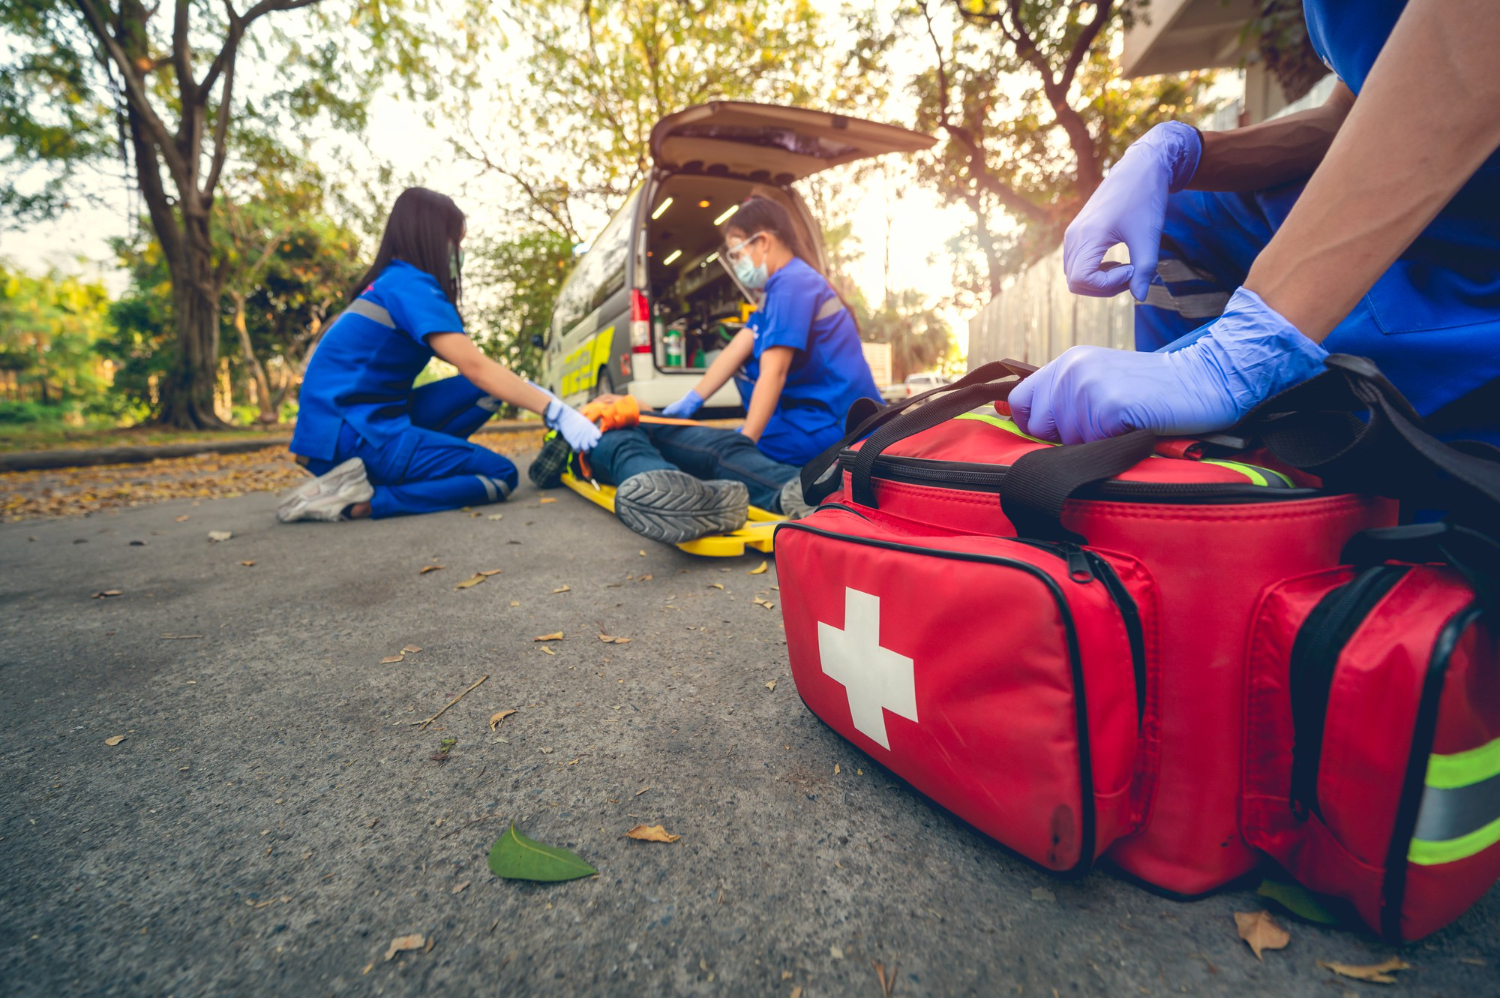 A group of paramedics treat a patient laying on a backboard on the ground while another paramedic holds a first aid supply bag.